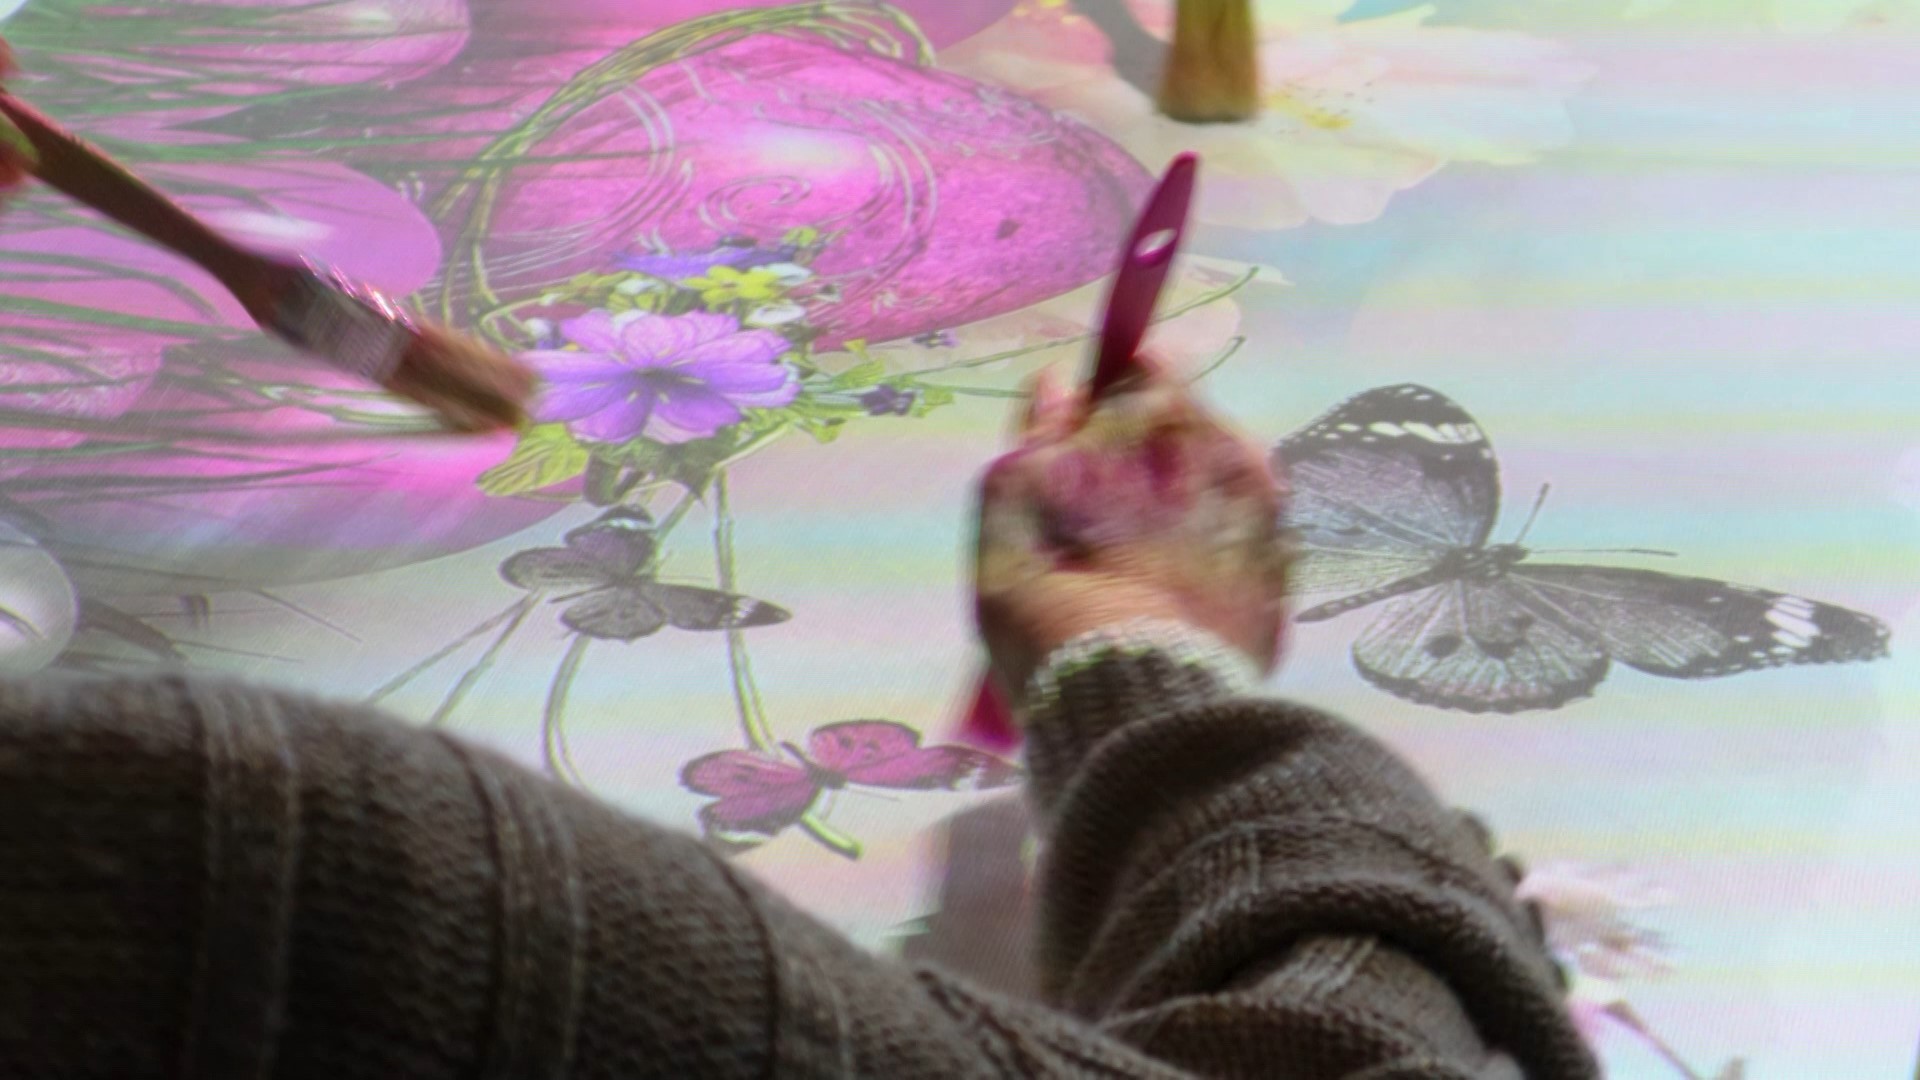 A care home resident using a paintbrush to carefully colour in the vibrant butterflies being projected on to the table in front of them from an interactive table projector.